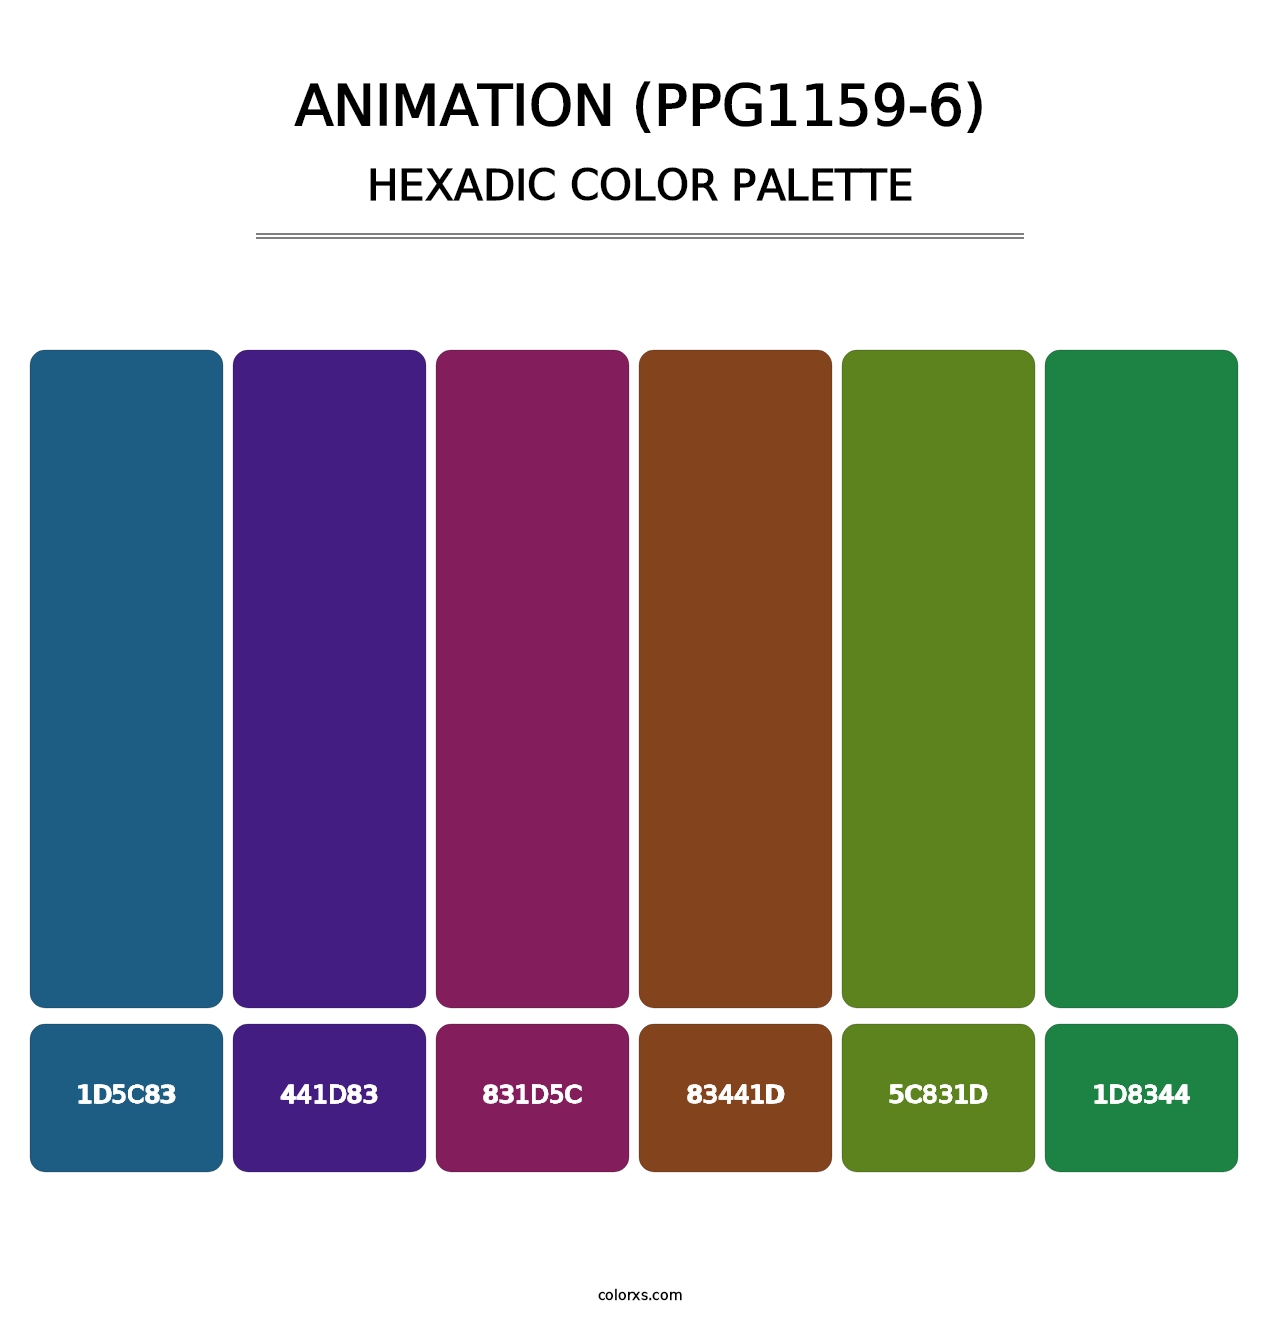 Animation (PPG1159-6) - Hexadic Color Palette